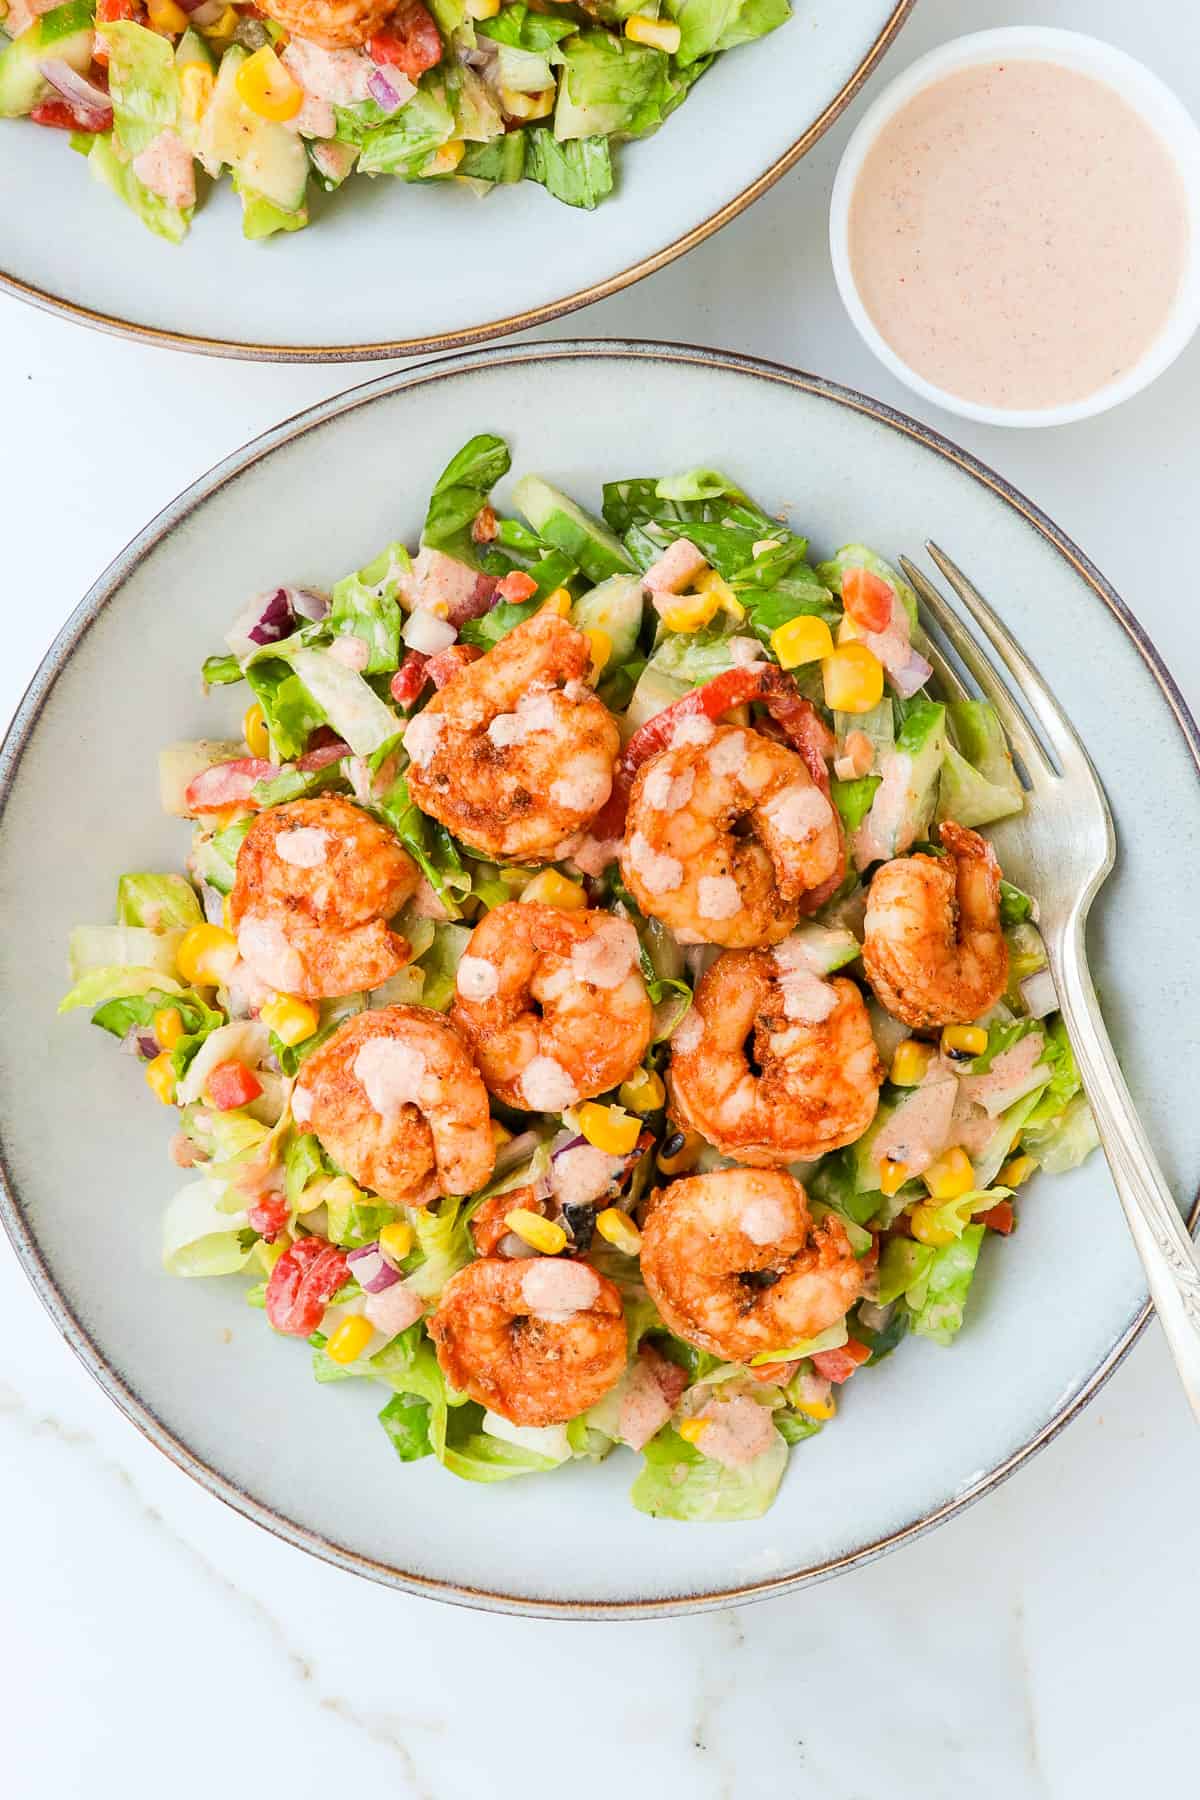 Cajun shrimp salad served in a bowl with extra dressing.